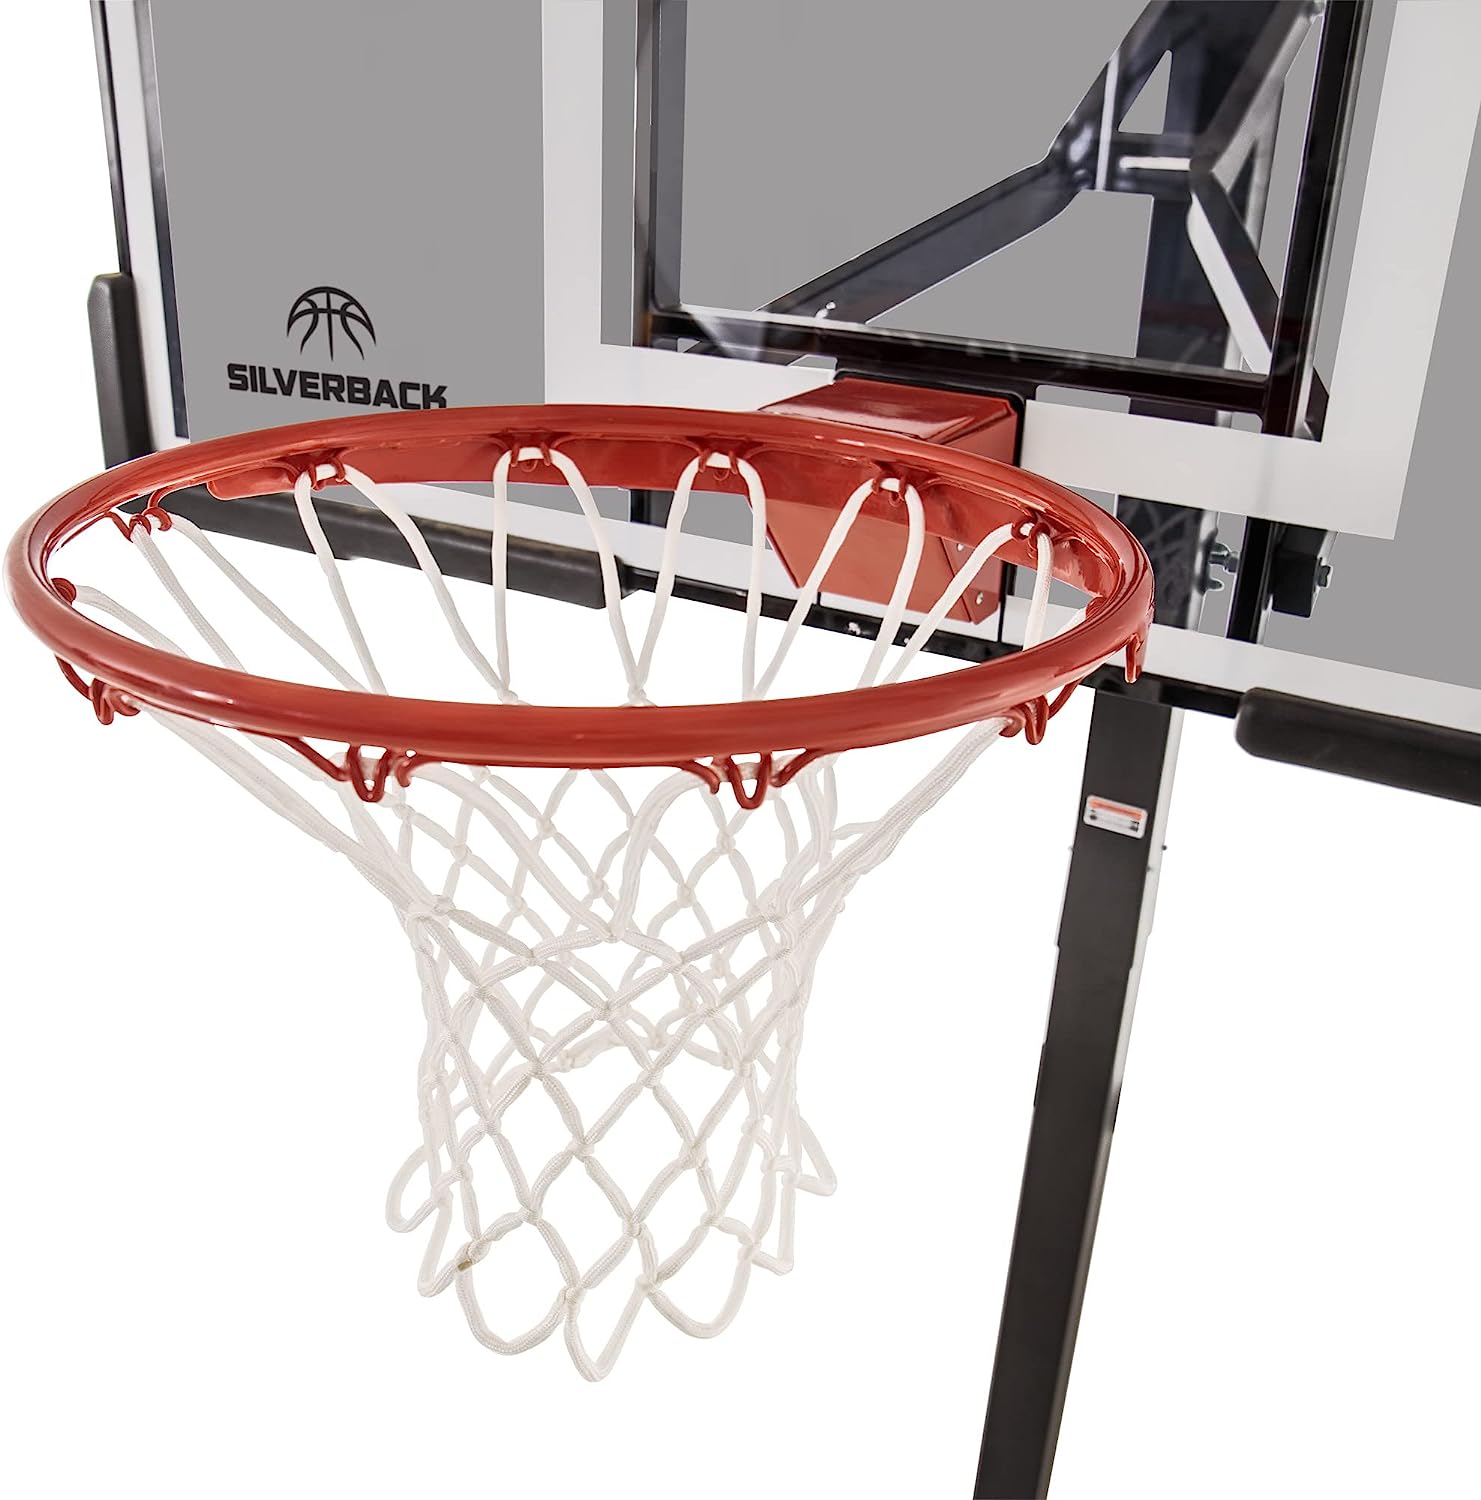 Silverback 54" and 60" In-Ground Basketball Systems - $660